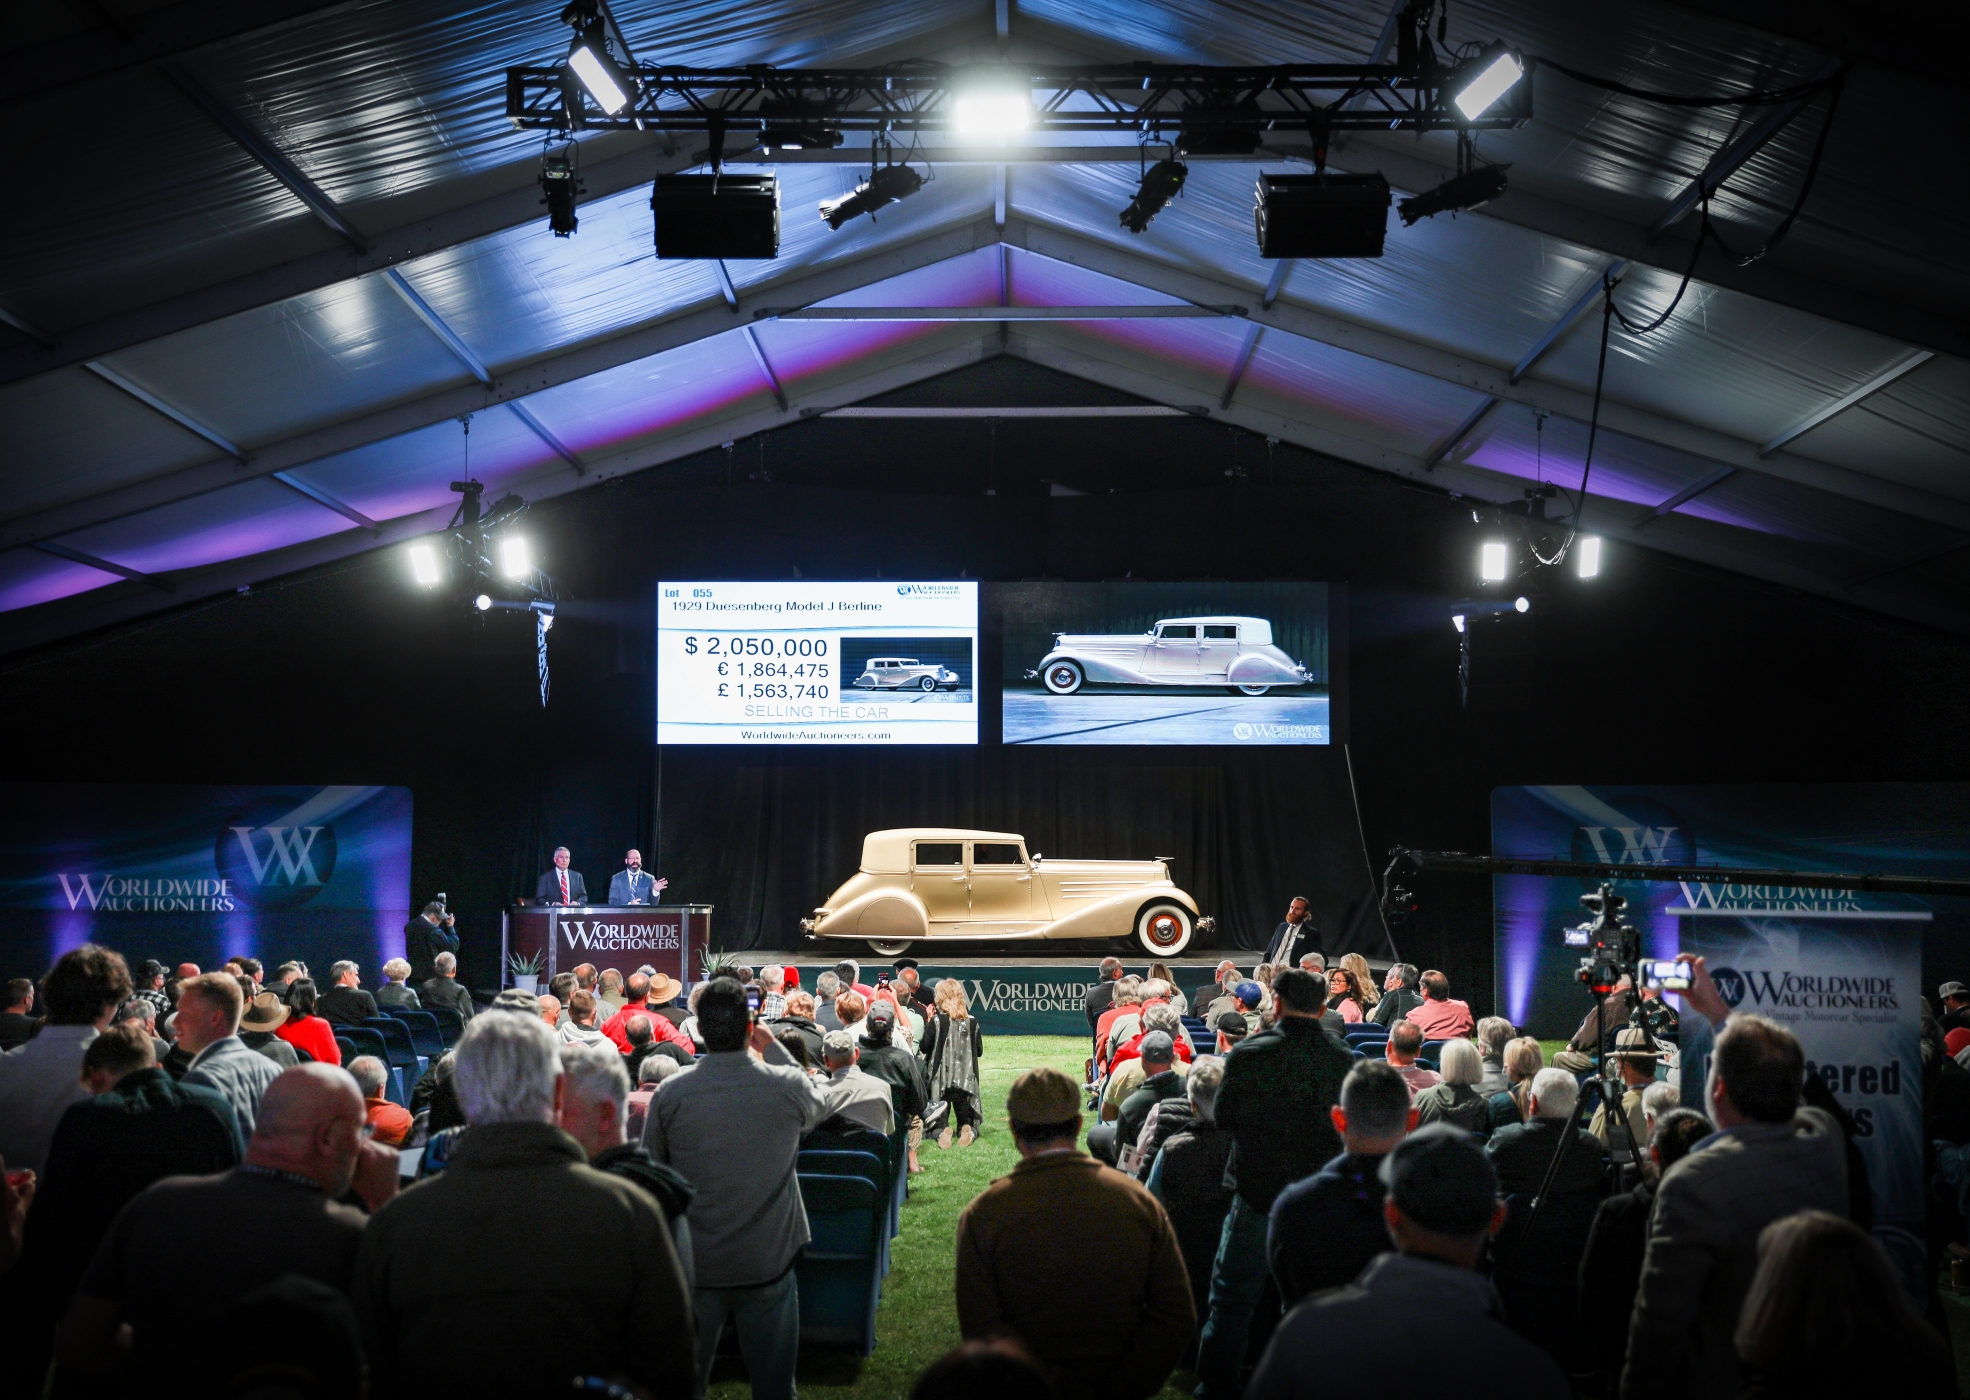 Worldwide is first off the block in Arizona, with a mighty 1929 Duesenberg Model J Berline bringing $2.26 million at the Scottsdale Auction